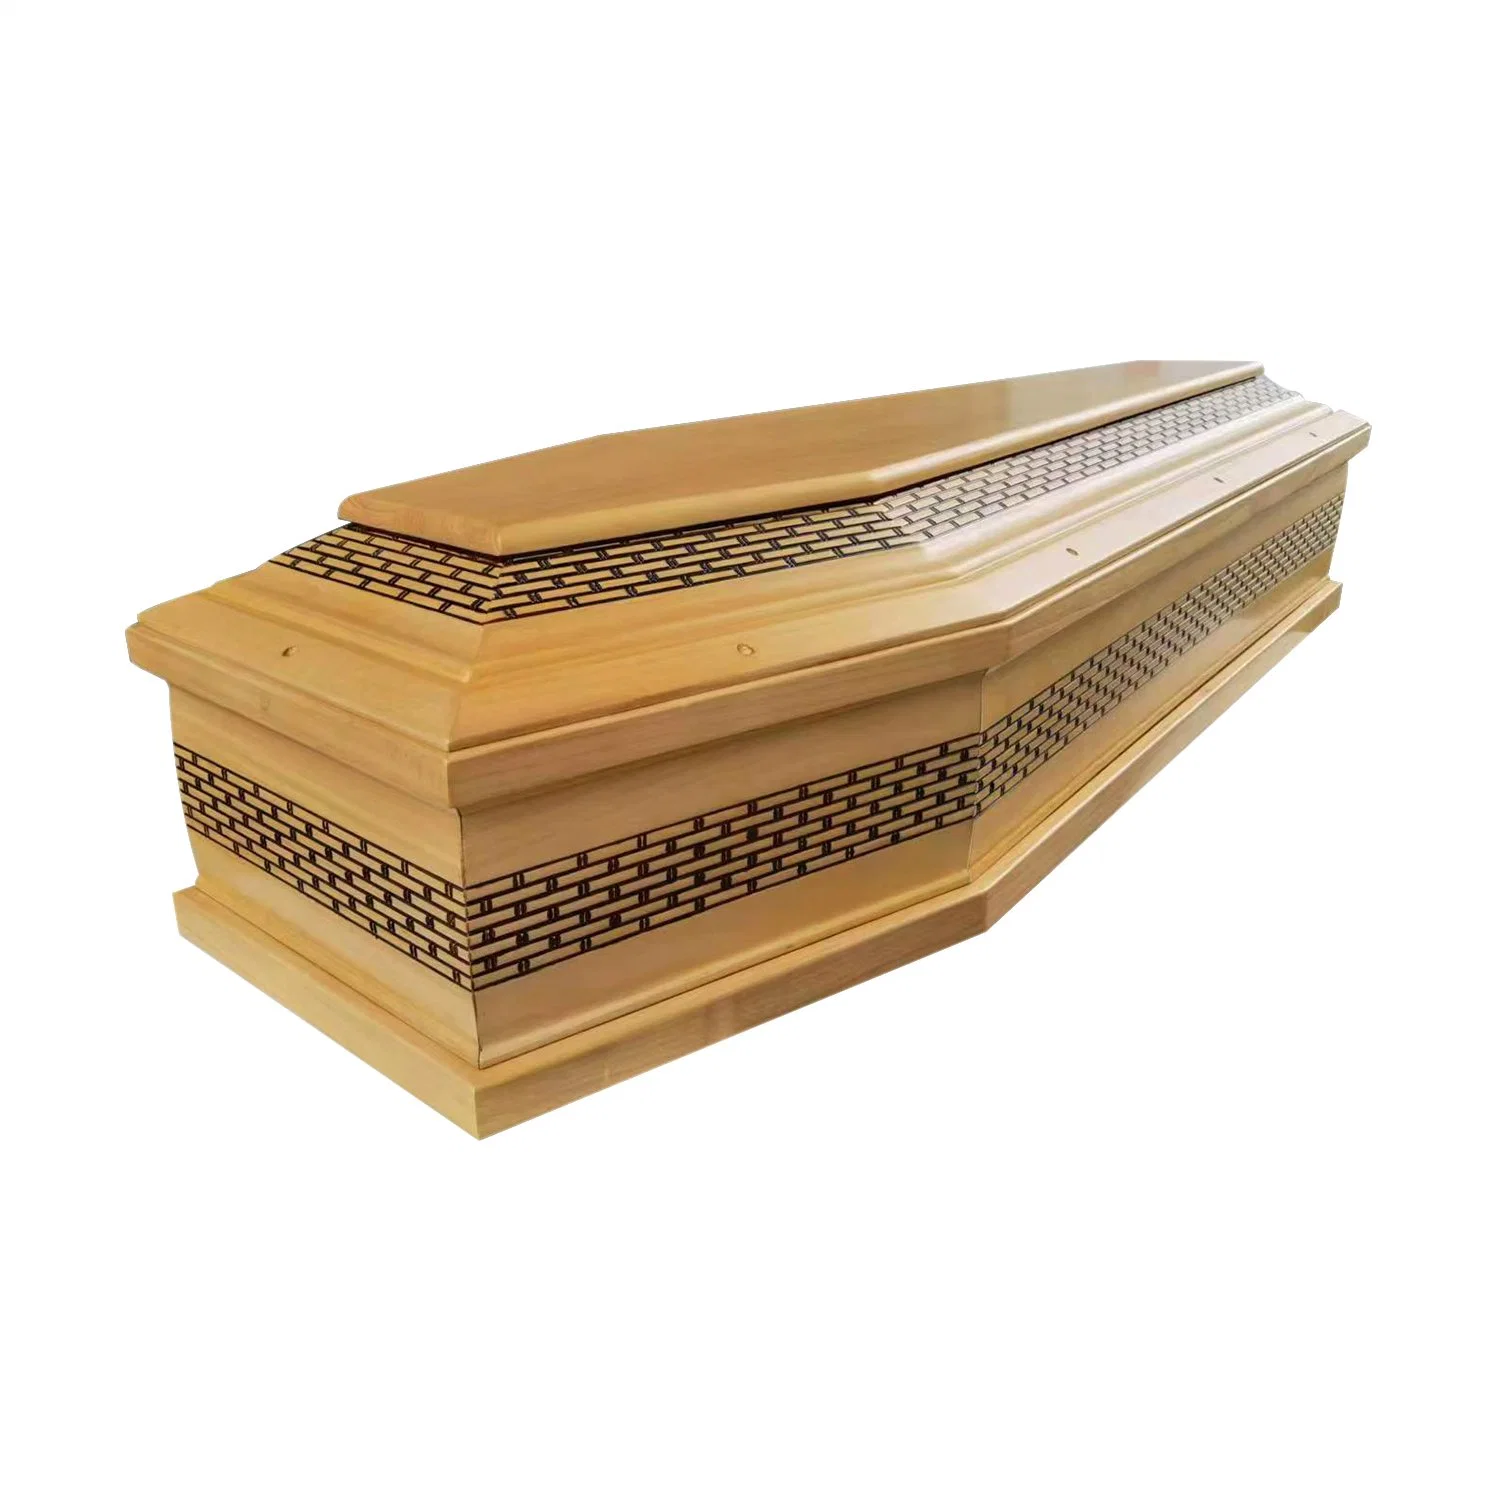 Hot Sales Wooden Coffin Dimensions Trumny Funeral Supplies